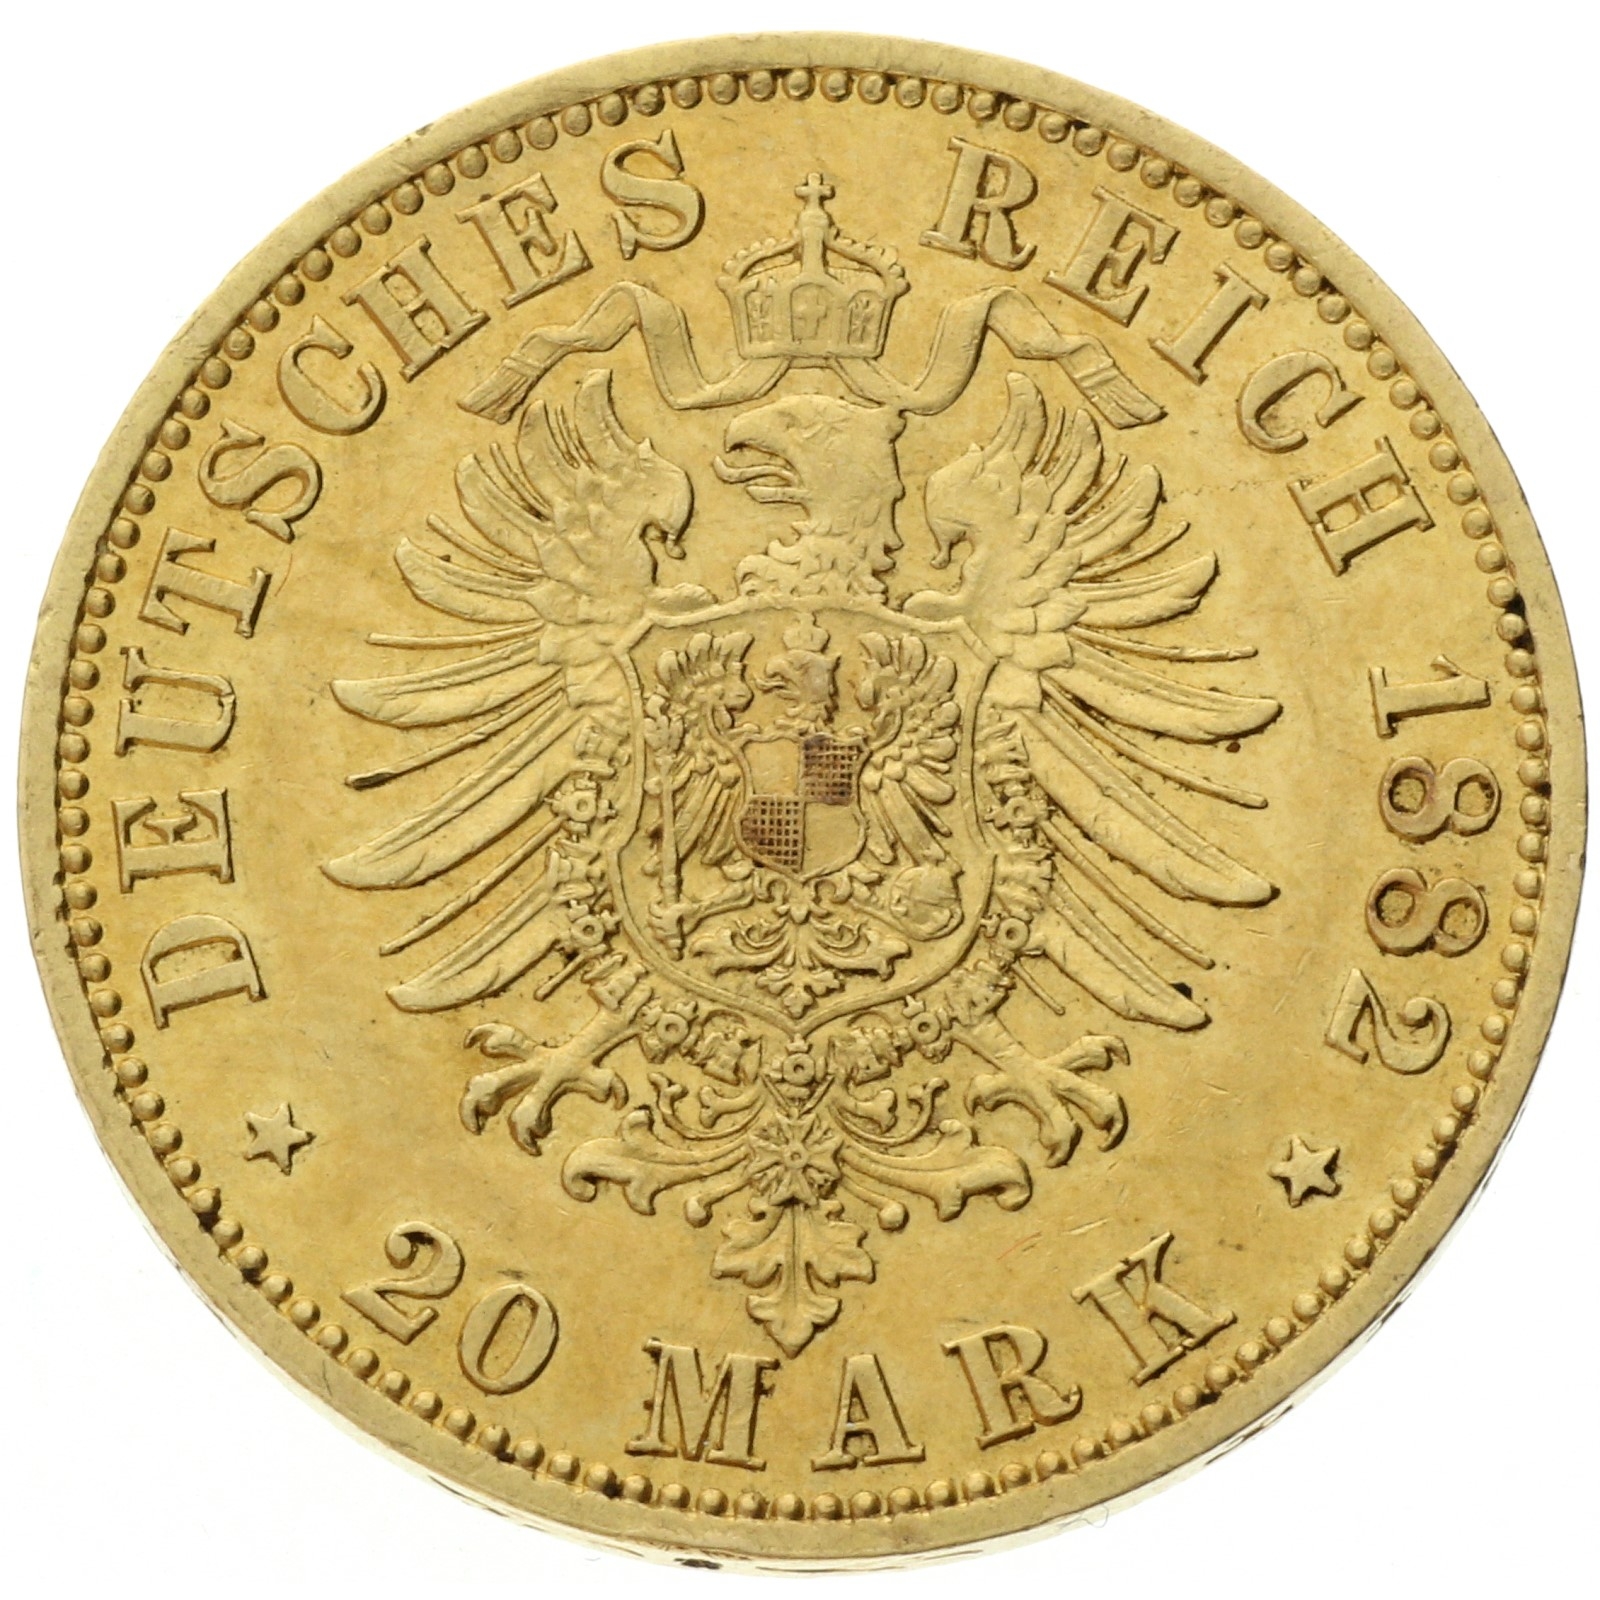 Germany -  Prussia - 20 mark - 1882 - A